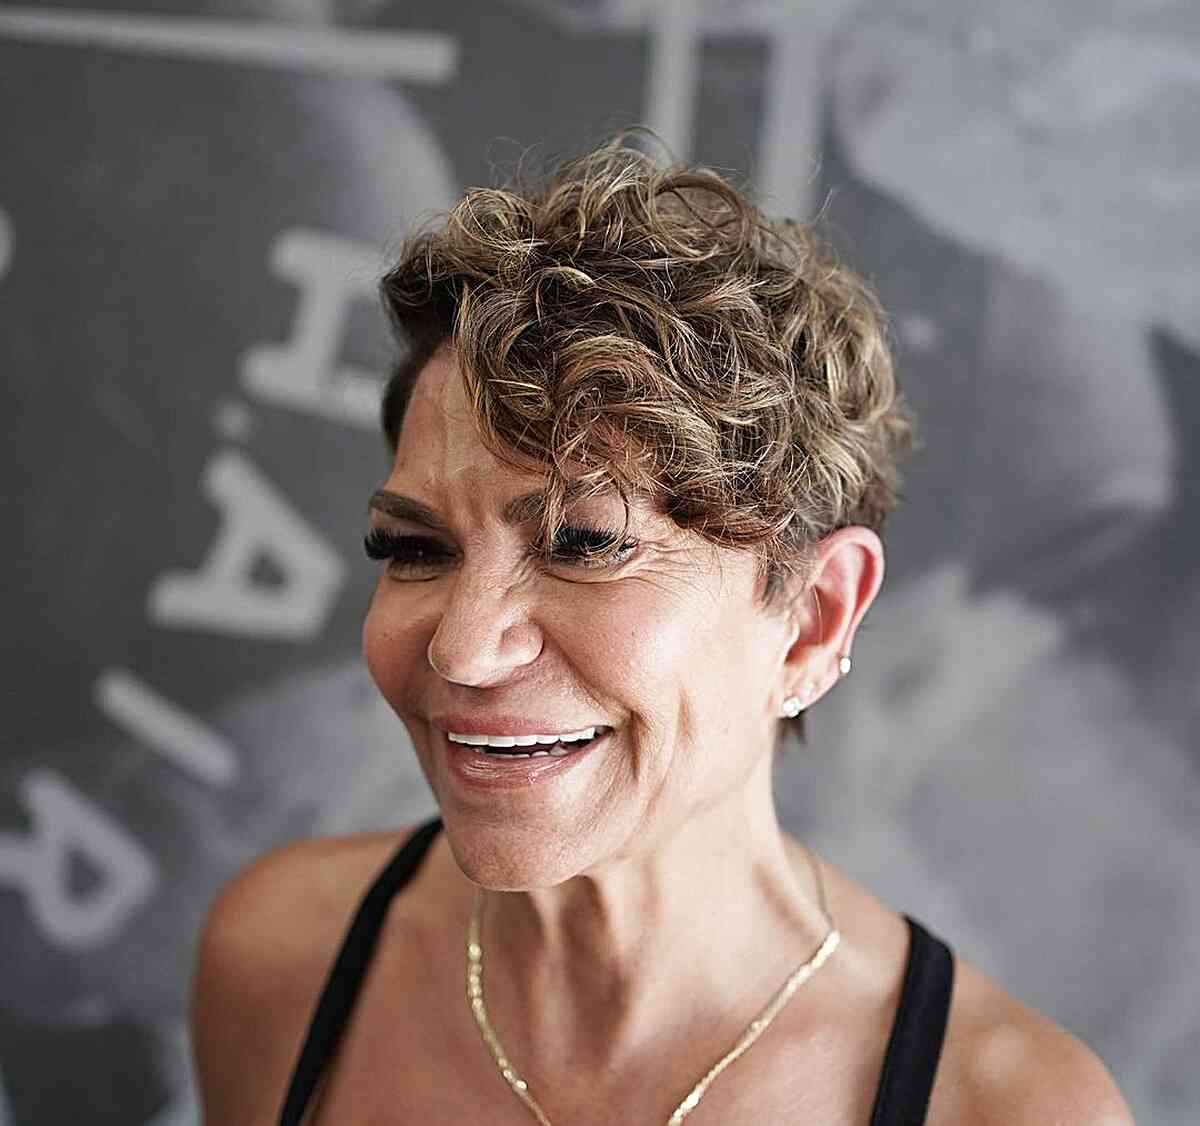 Side Part Pixie Crop with Curly Bangs for older women over 50